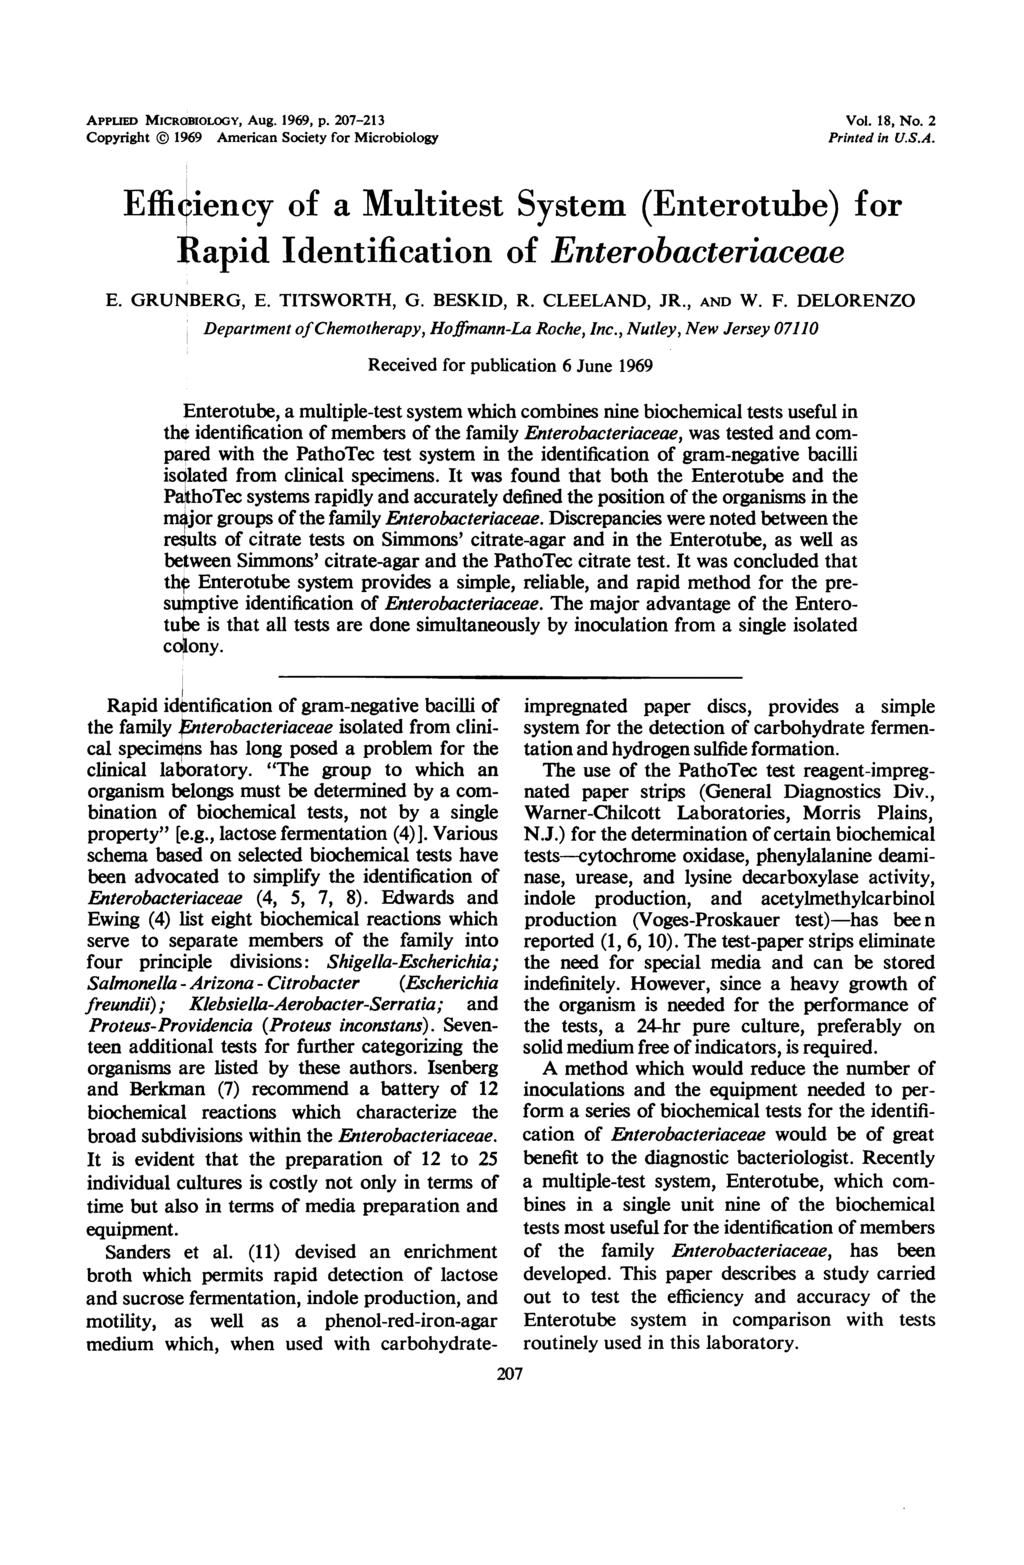 APPLIED MICROBIOLOGY, Aug. 1969, p. 207-213 Copyright 1969 American Society for Microbiology Vol. 18, No. 2 Printed in U.S.A. Effi.